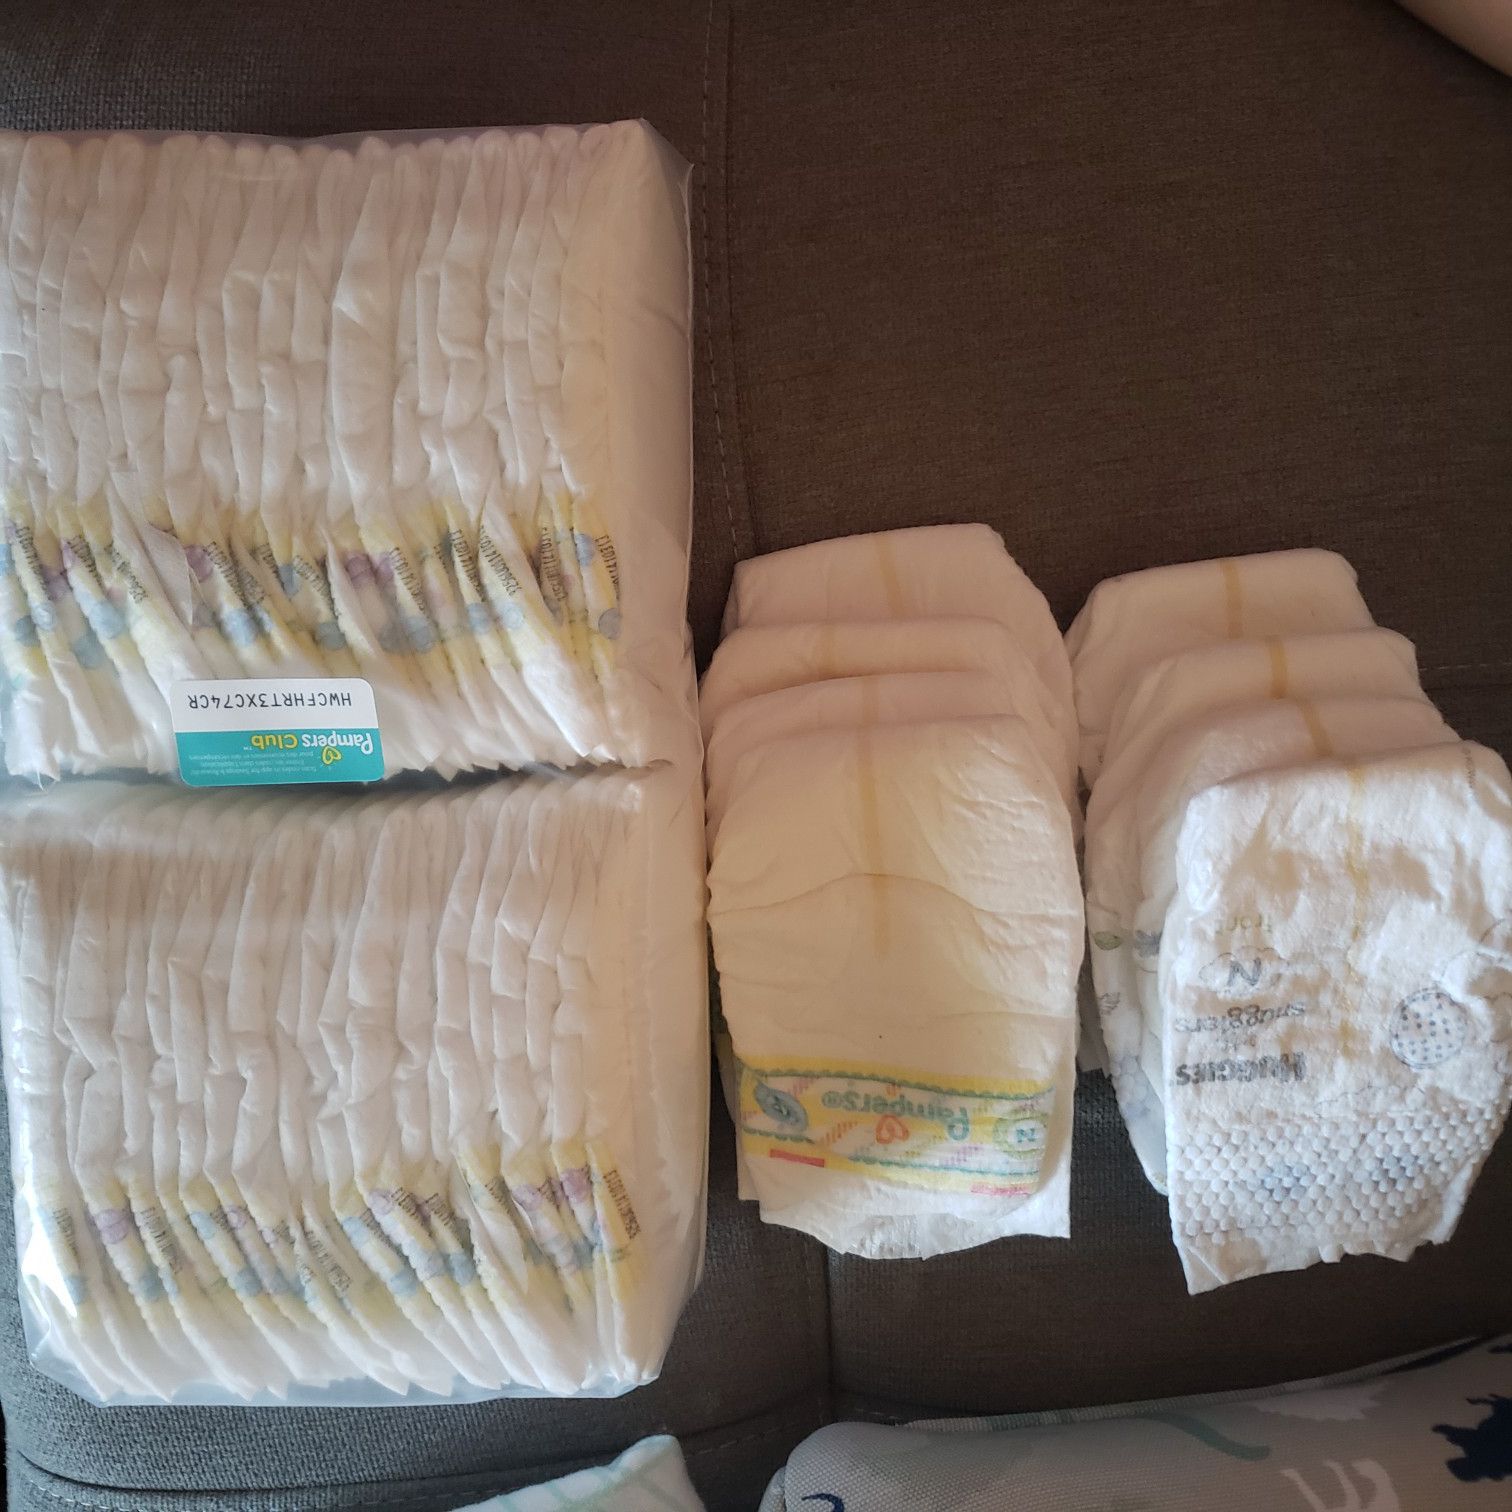 Diapers pampers and huggies